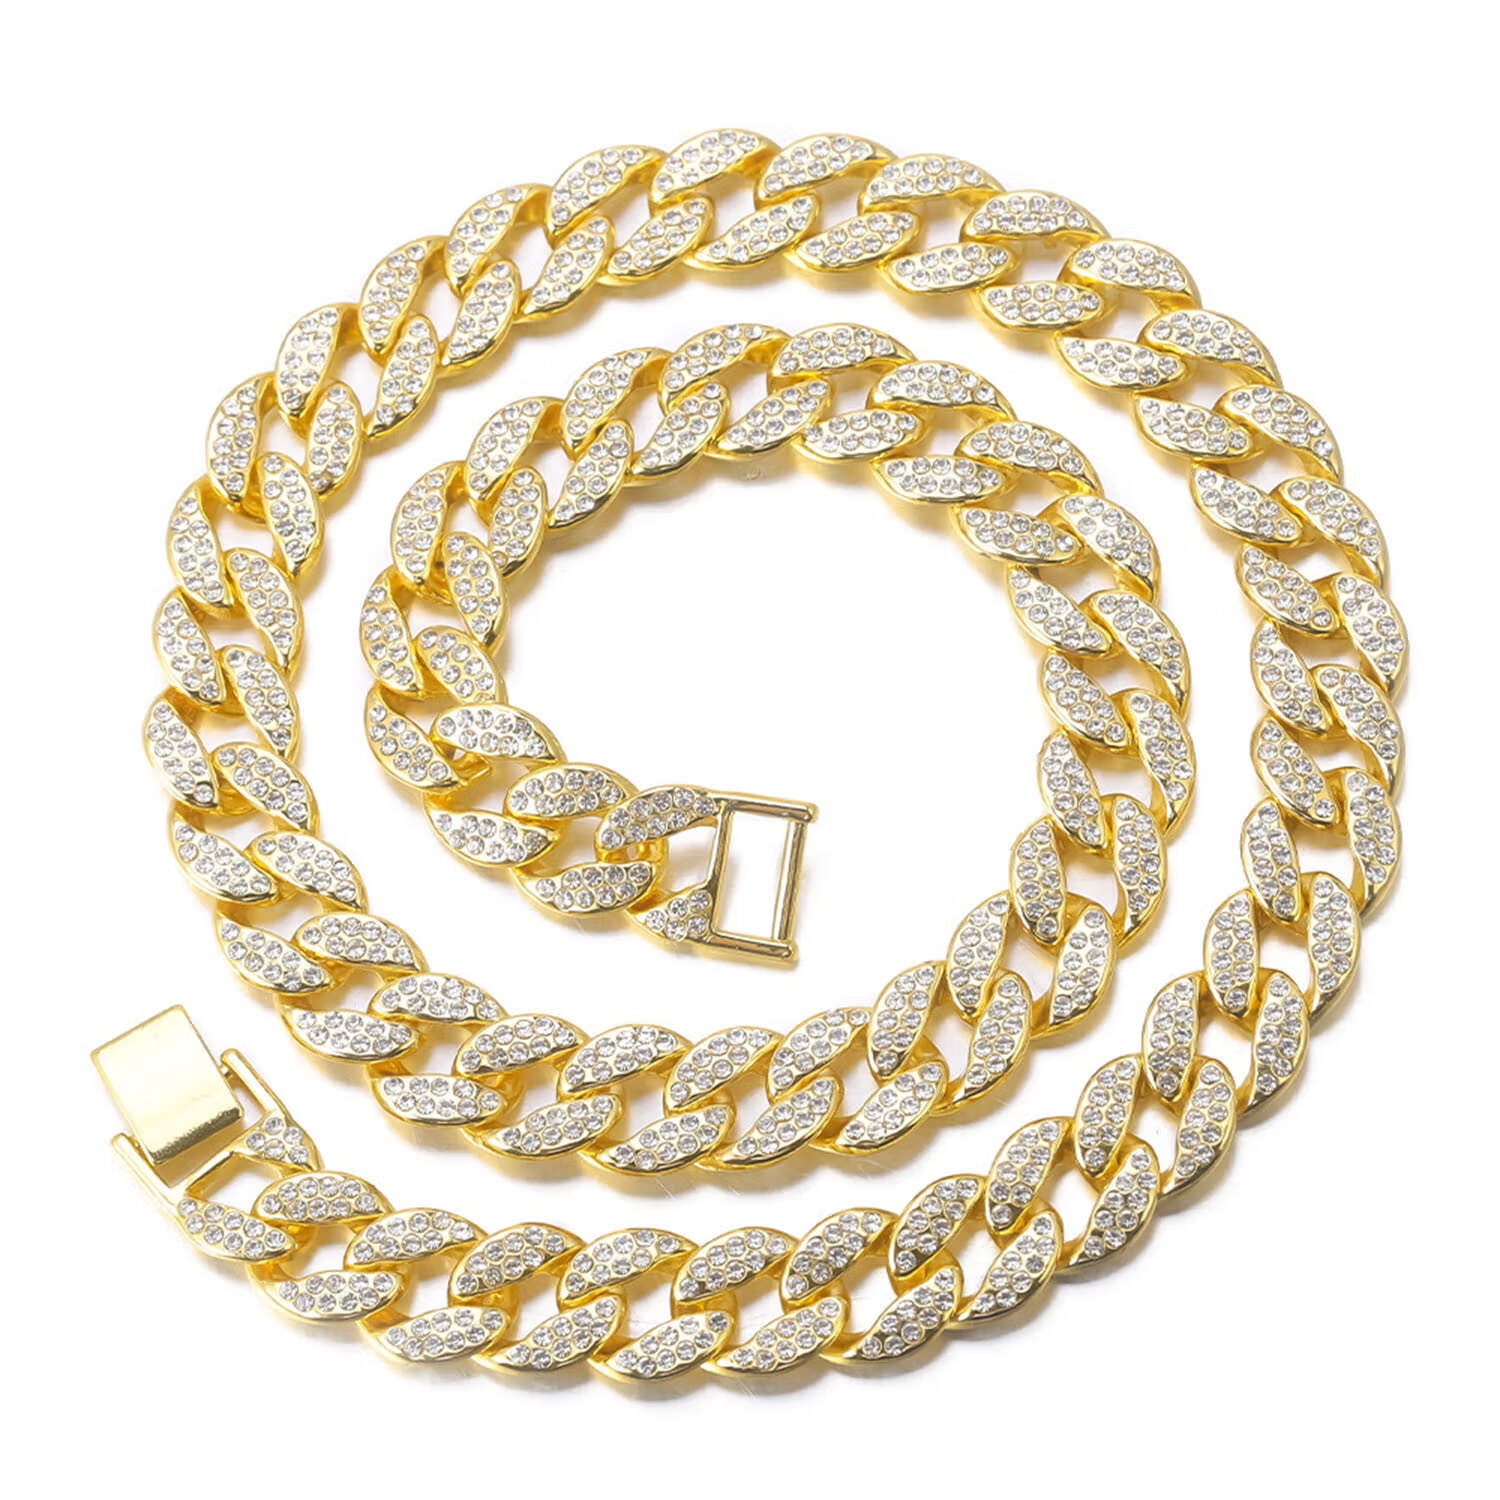 Gold Plated Necklace - Cubic Zirconic Diamond Miami Cuban Link Chains, Real Hip Hop Jewelry 8inches / White Gold by Pearde Design